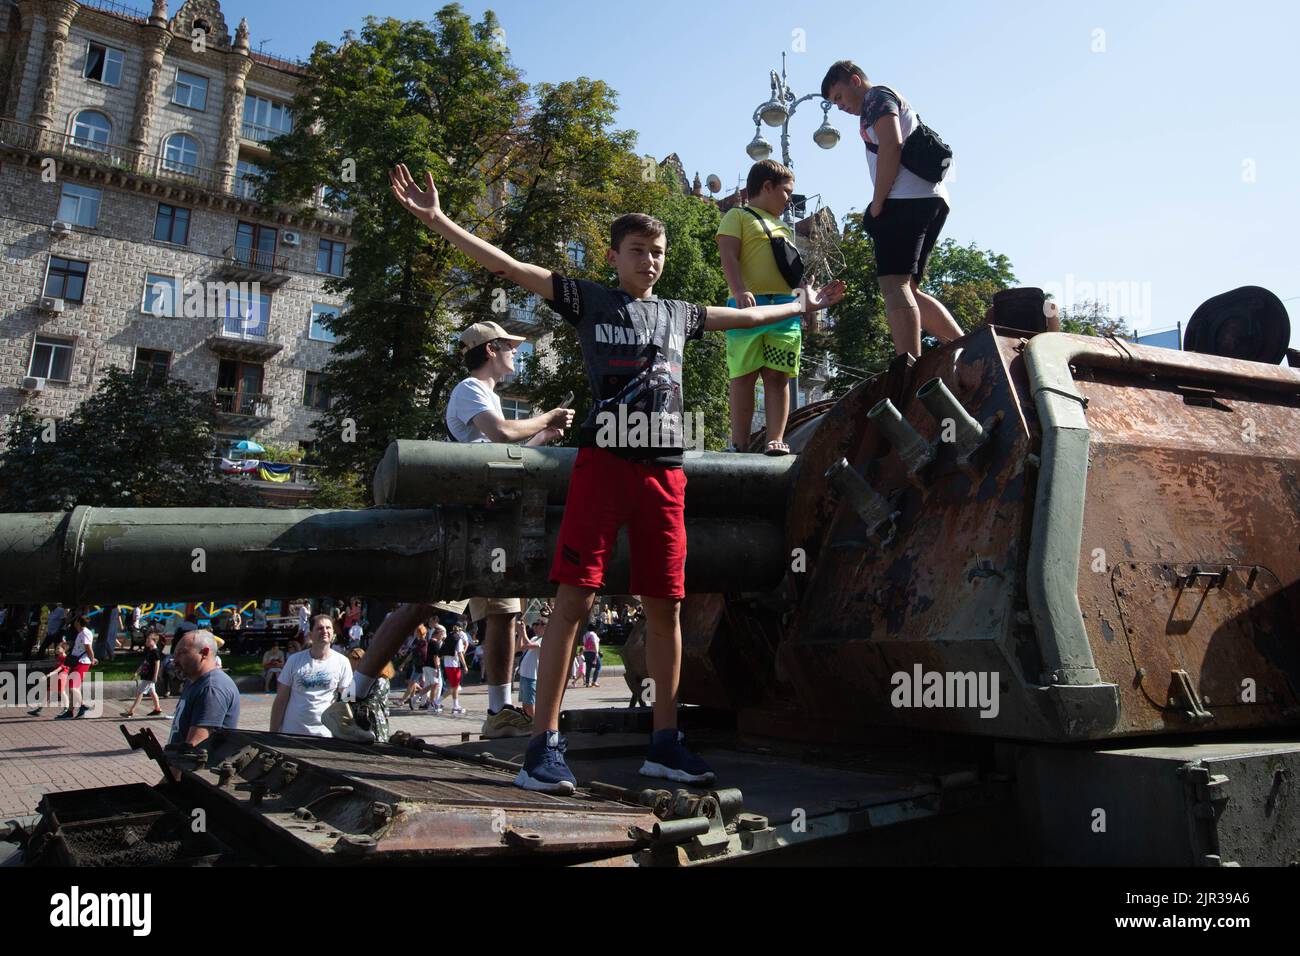 Children play on a destroyed Russian tank located on the main street Khreshchatyk as part of the upcoming celebration of the Independence Day of Ukraine amid Russia's invasion of Ukraine in central Kyiv. Stock Photo